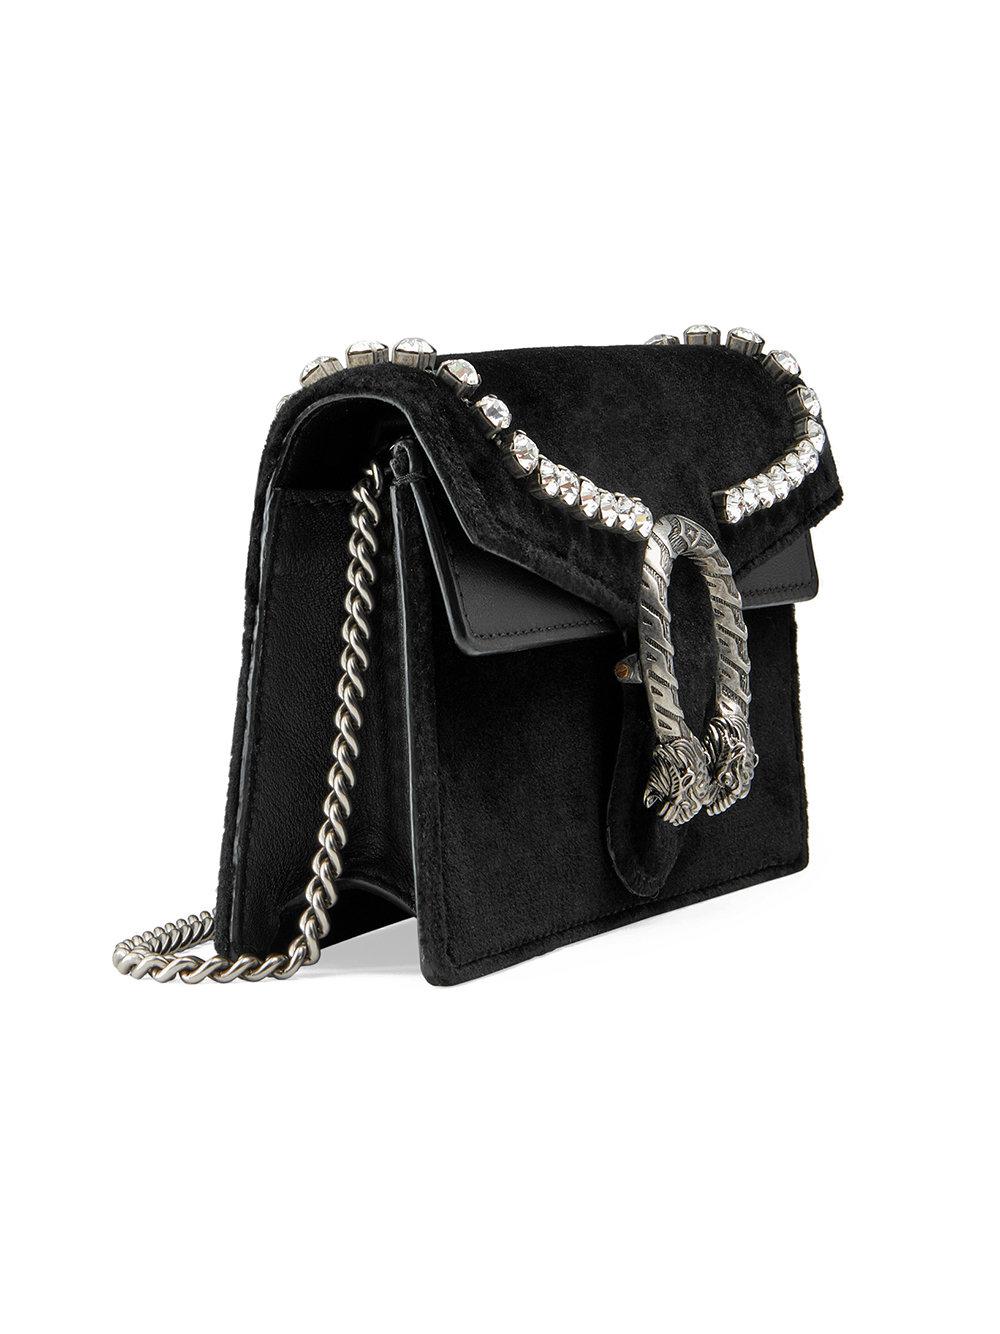 Gucci Dionysus Mini Velvet Wallet On A Chain in Black - Lyst